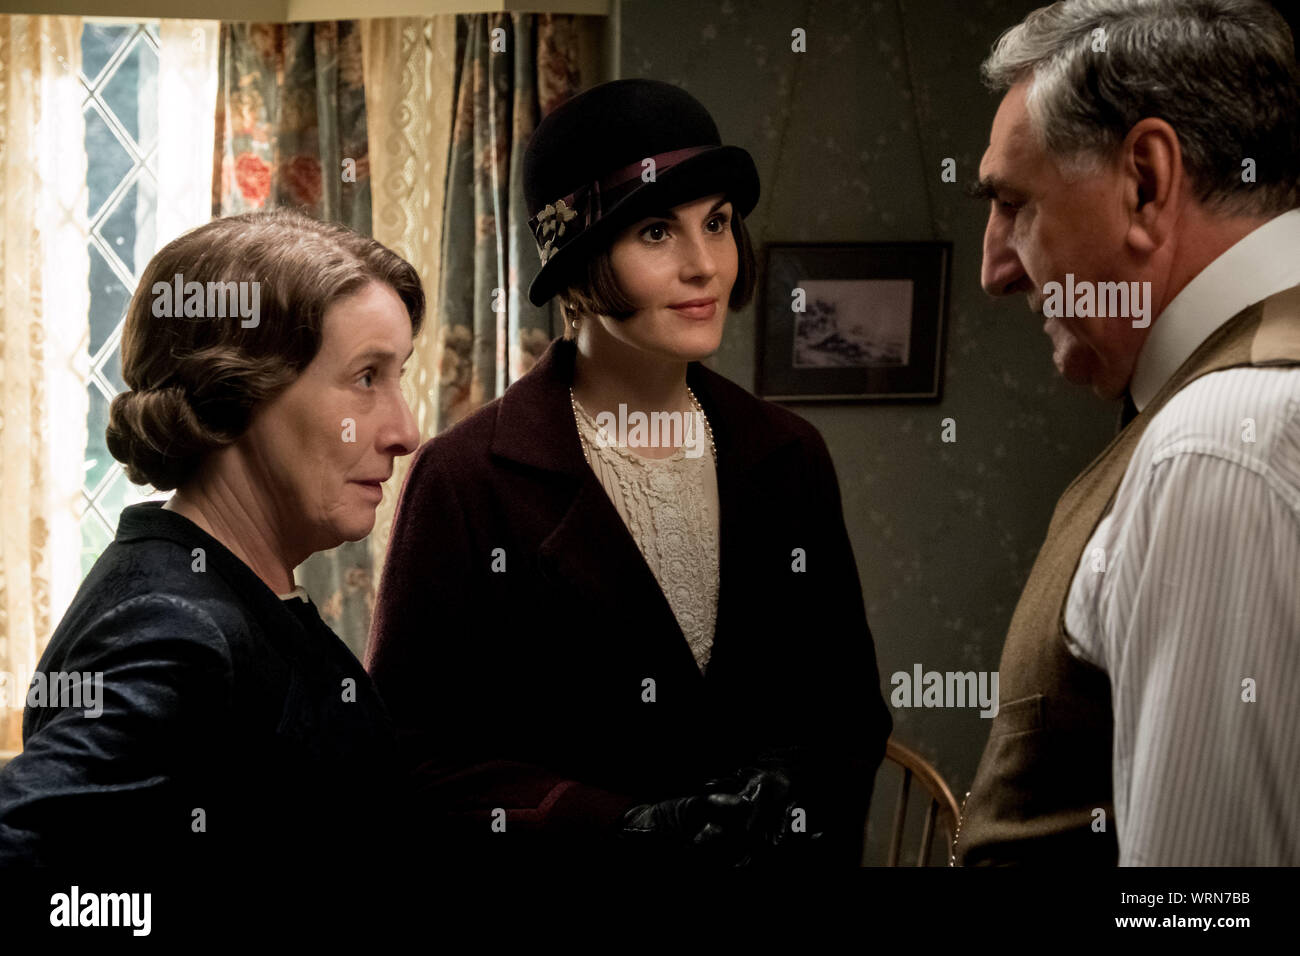 RELEASE DATE: September 20, 2019 TITLE: Downton Abbey STUDIO: Focus Features DIRECTOR: Michael Engler PLOT: Adapted from the hit TV series Downton Abbey that tells the story of the Crawley family, a wealthy owner of a large estate in the English countryside in the early 20th century. STARRING: PHYLLIS LOGAN as Mrs. Hughes, MICHELLE DOCKERY as Lady Mary Talbot, JIM CARTER as Mr. Carson. (Credit Image: © Focus Features/Entertainment Pictures) Stock Photo